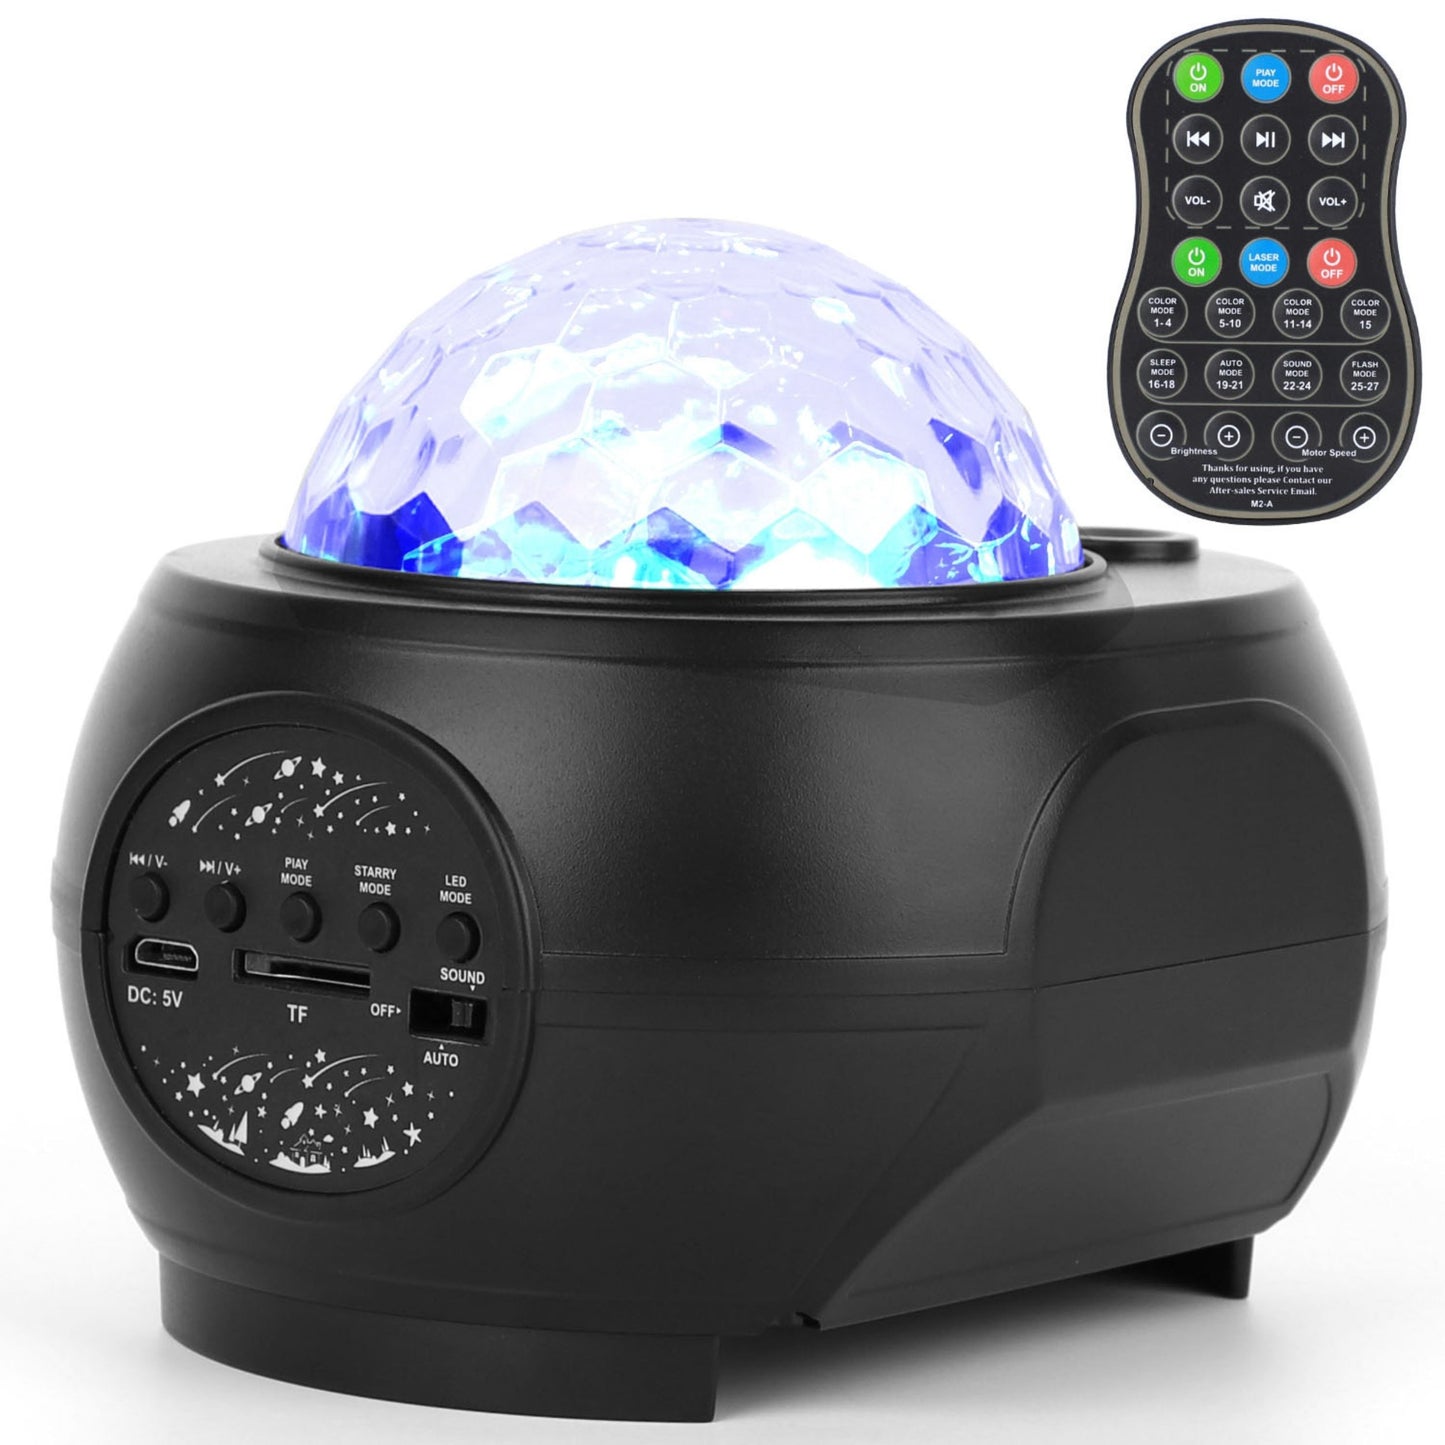 Galaxy Star Projector LED Lamp: USB Ocean Wave Star Light with Remote, Wireless Music Speaker - for Ceiling Bedroom. - Black -